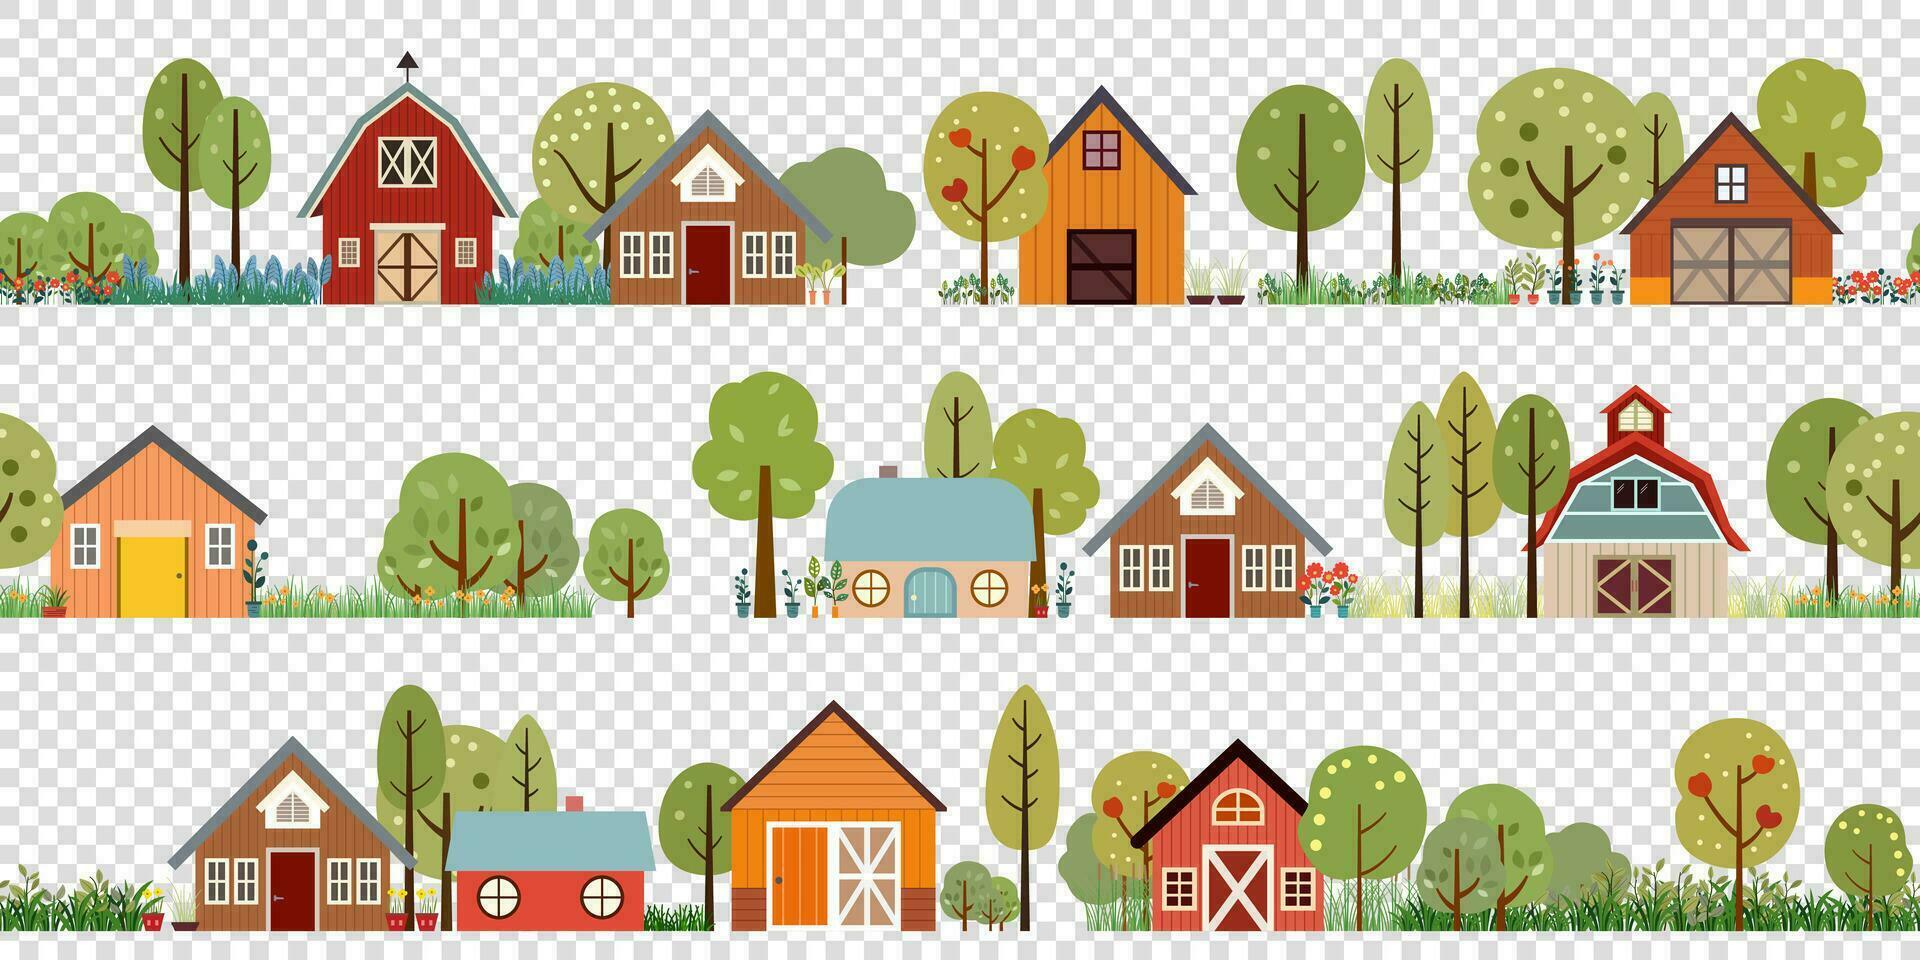 border vector barn farm, house, meadow and tree panoramic landscape scene flat style. village agriculture isolated illustration